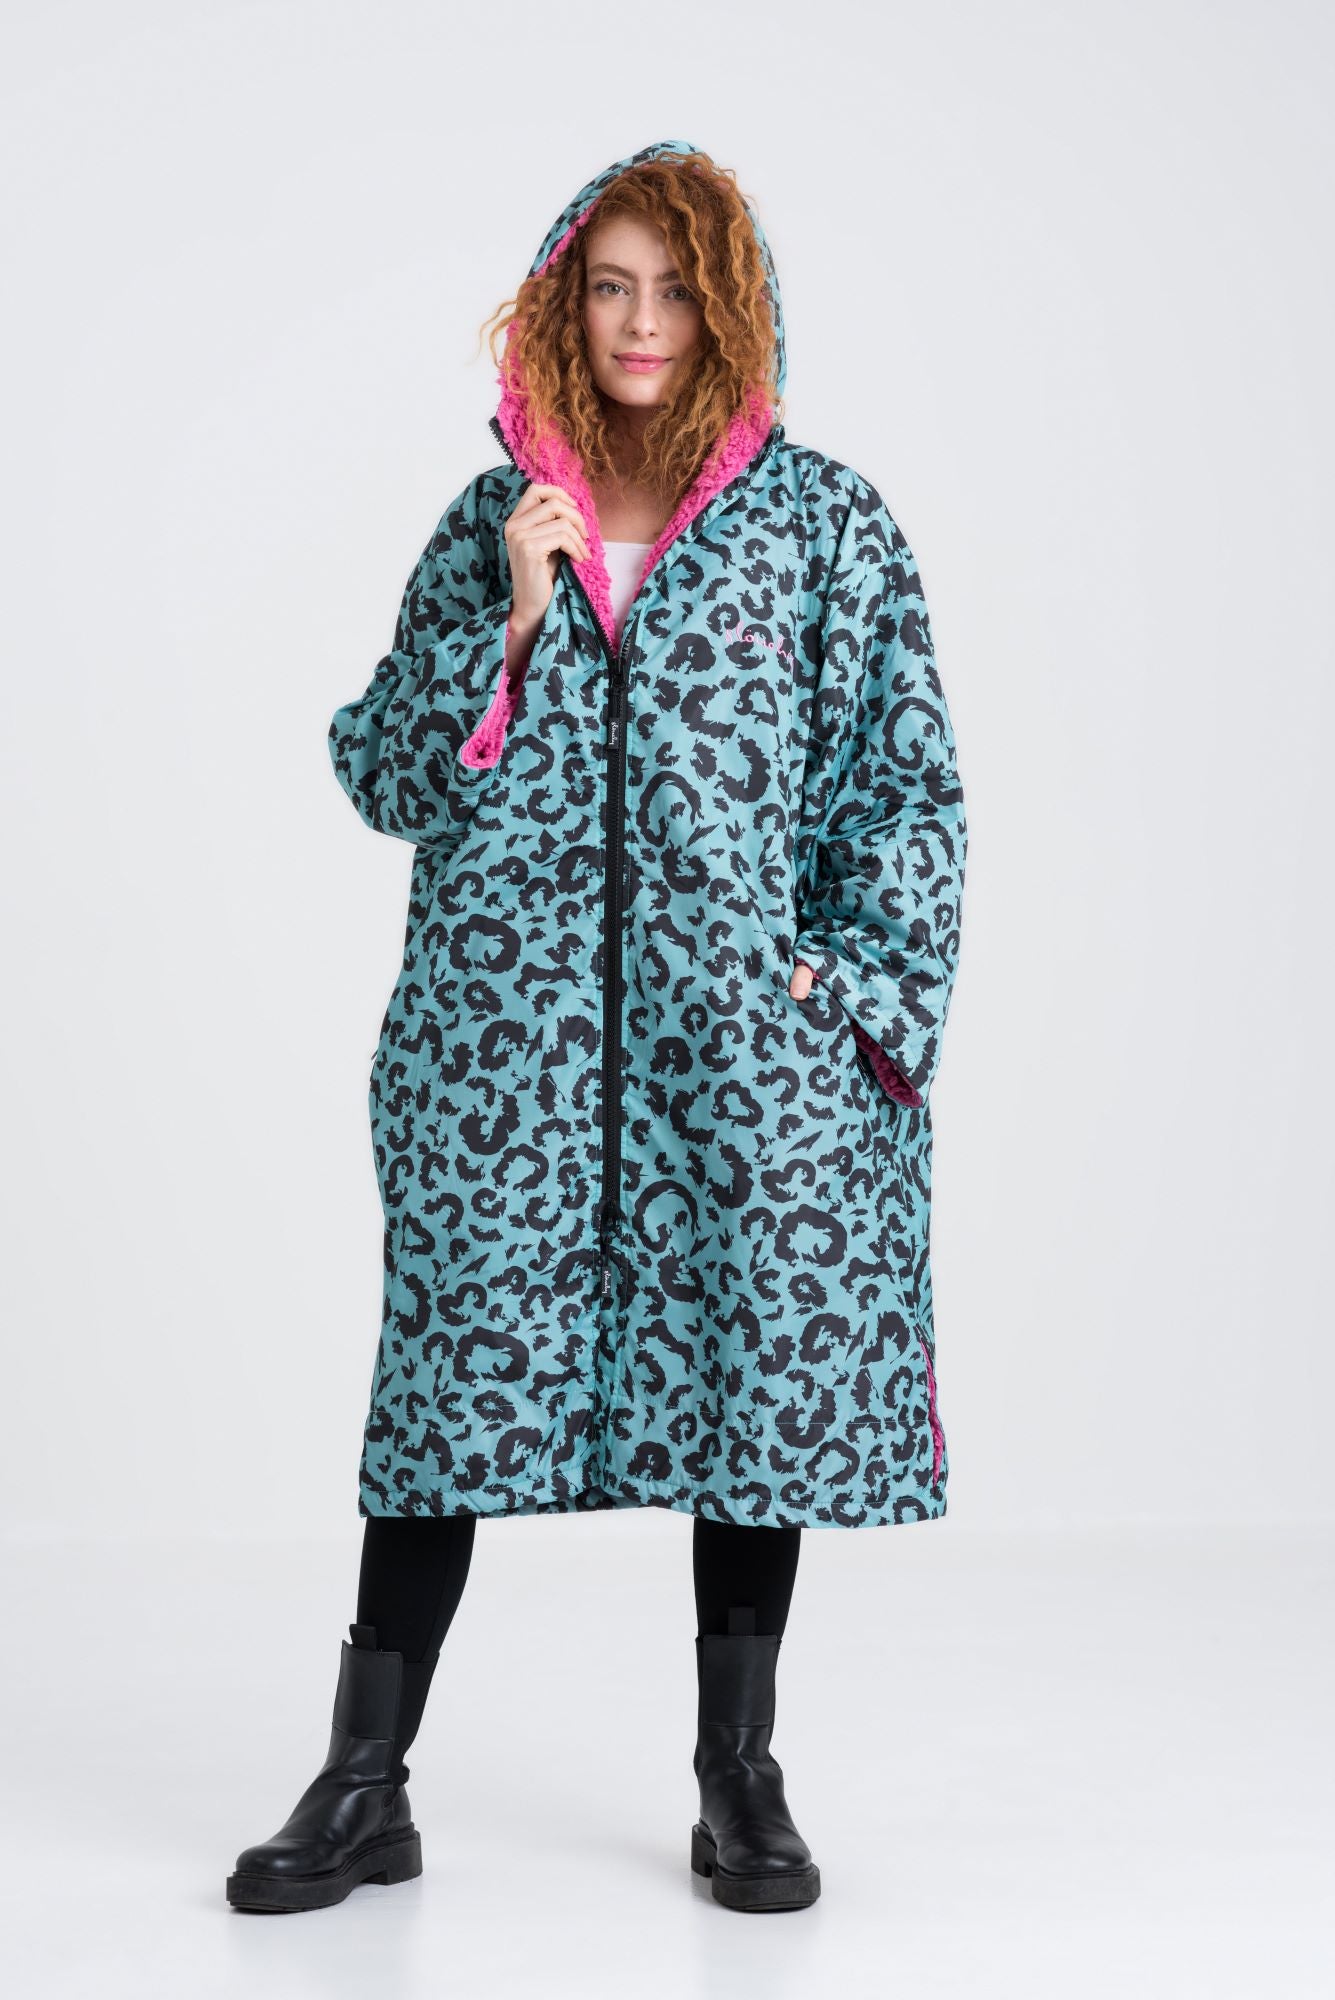 Adult Green Leopard/Pink Change Robe - Slouchy